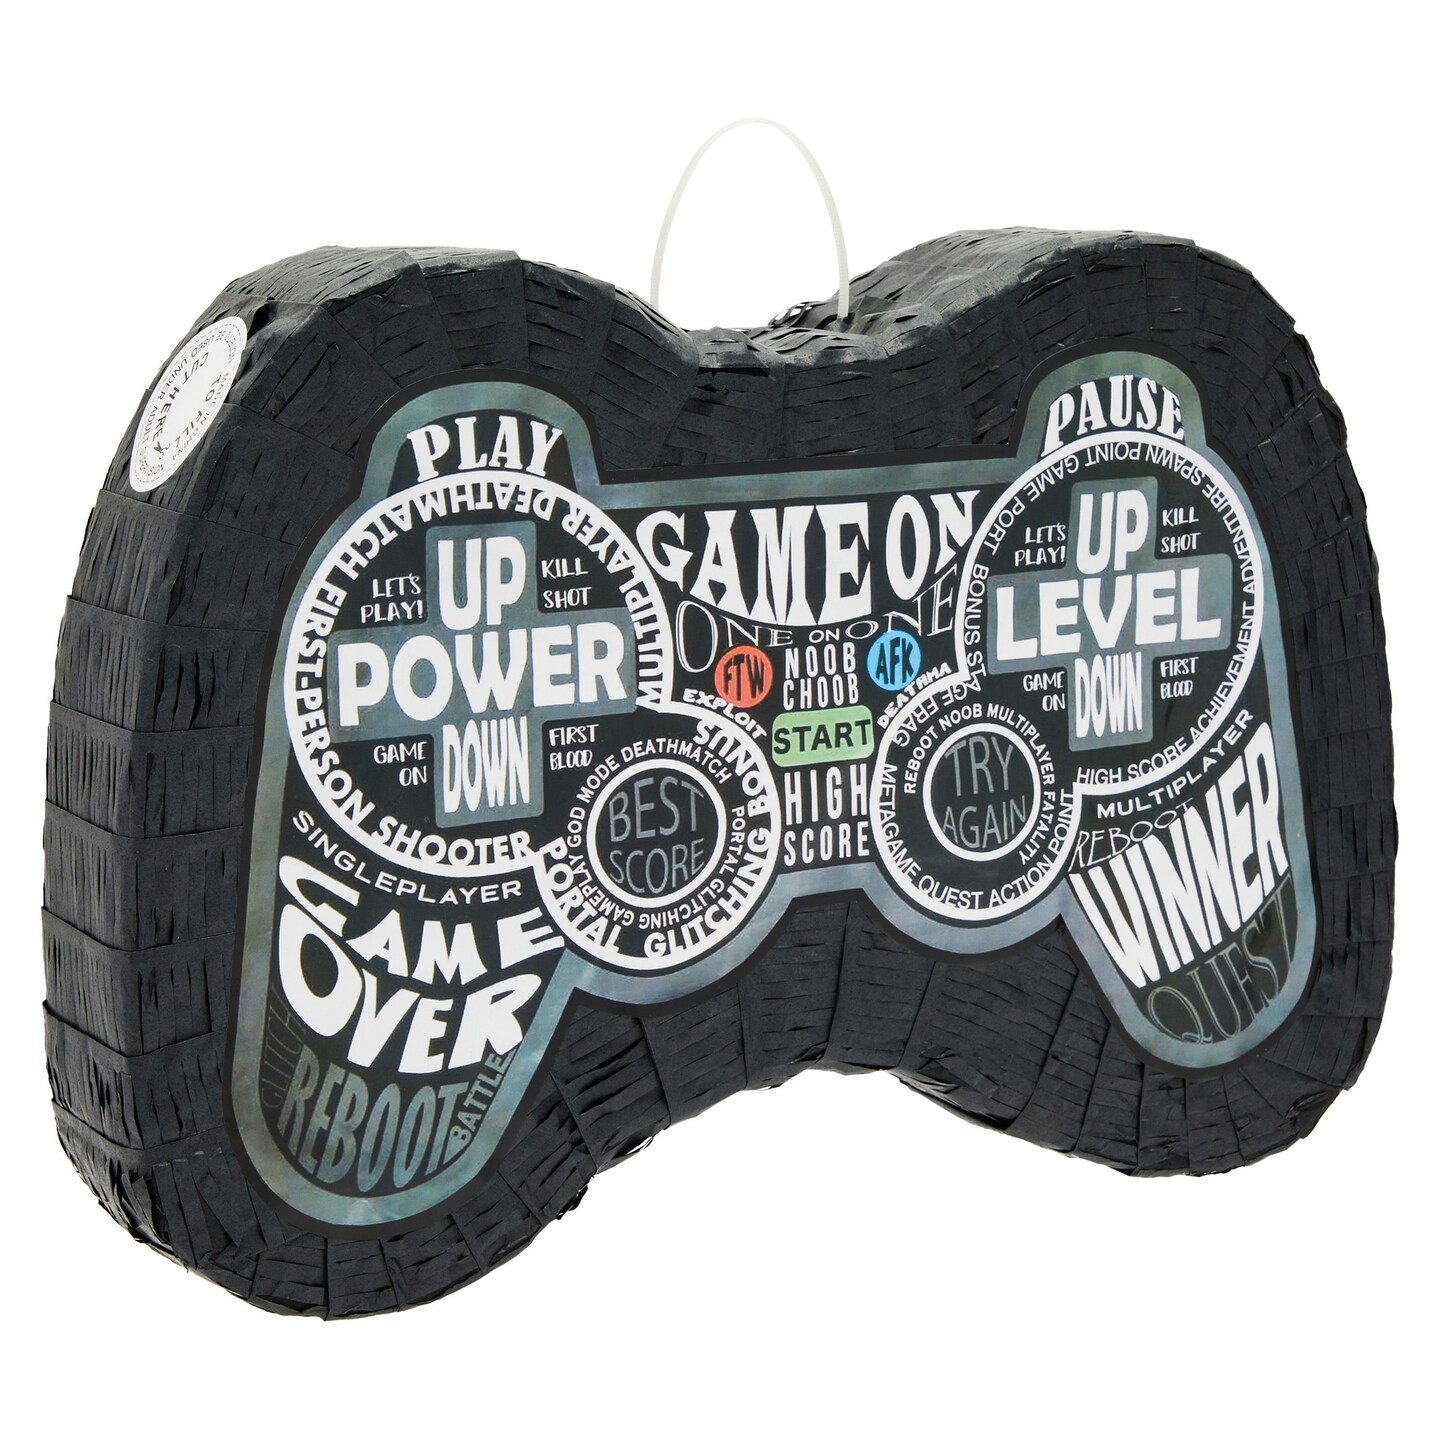 Small Video Game Controller Pinata for Gamer Birthday Party Decorations, 16.5 x 11 x 3 Inches